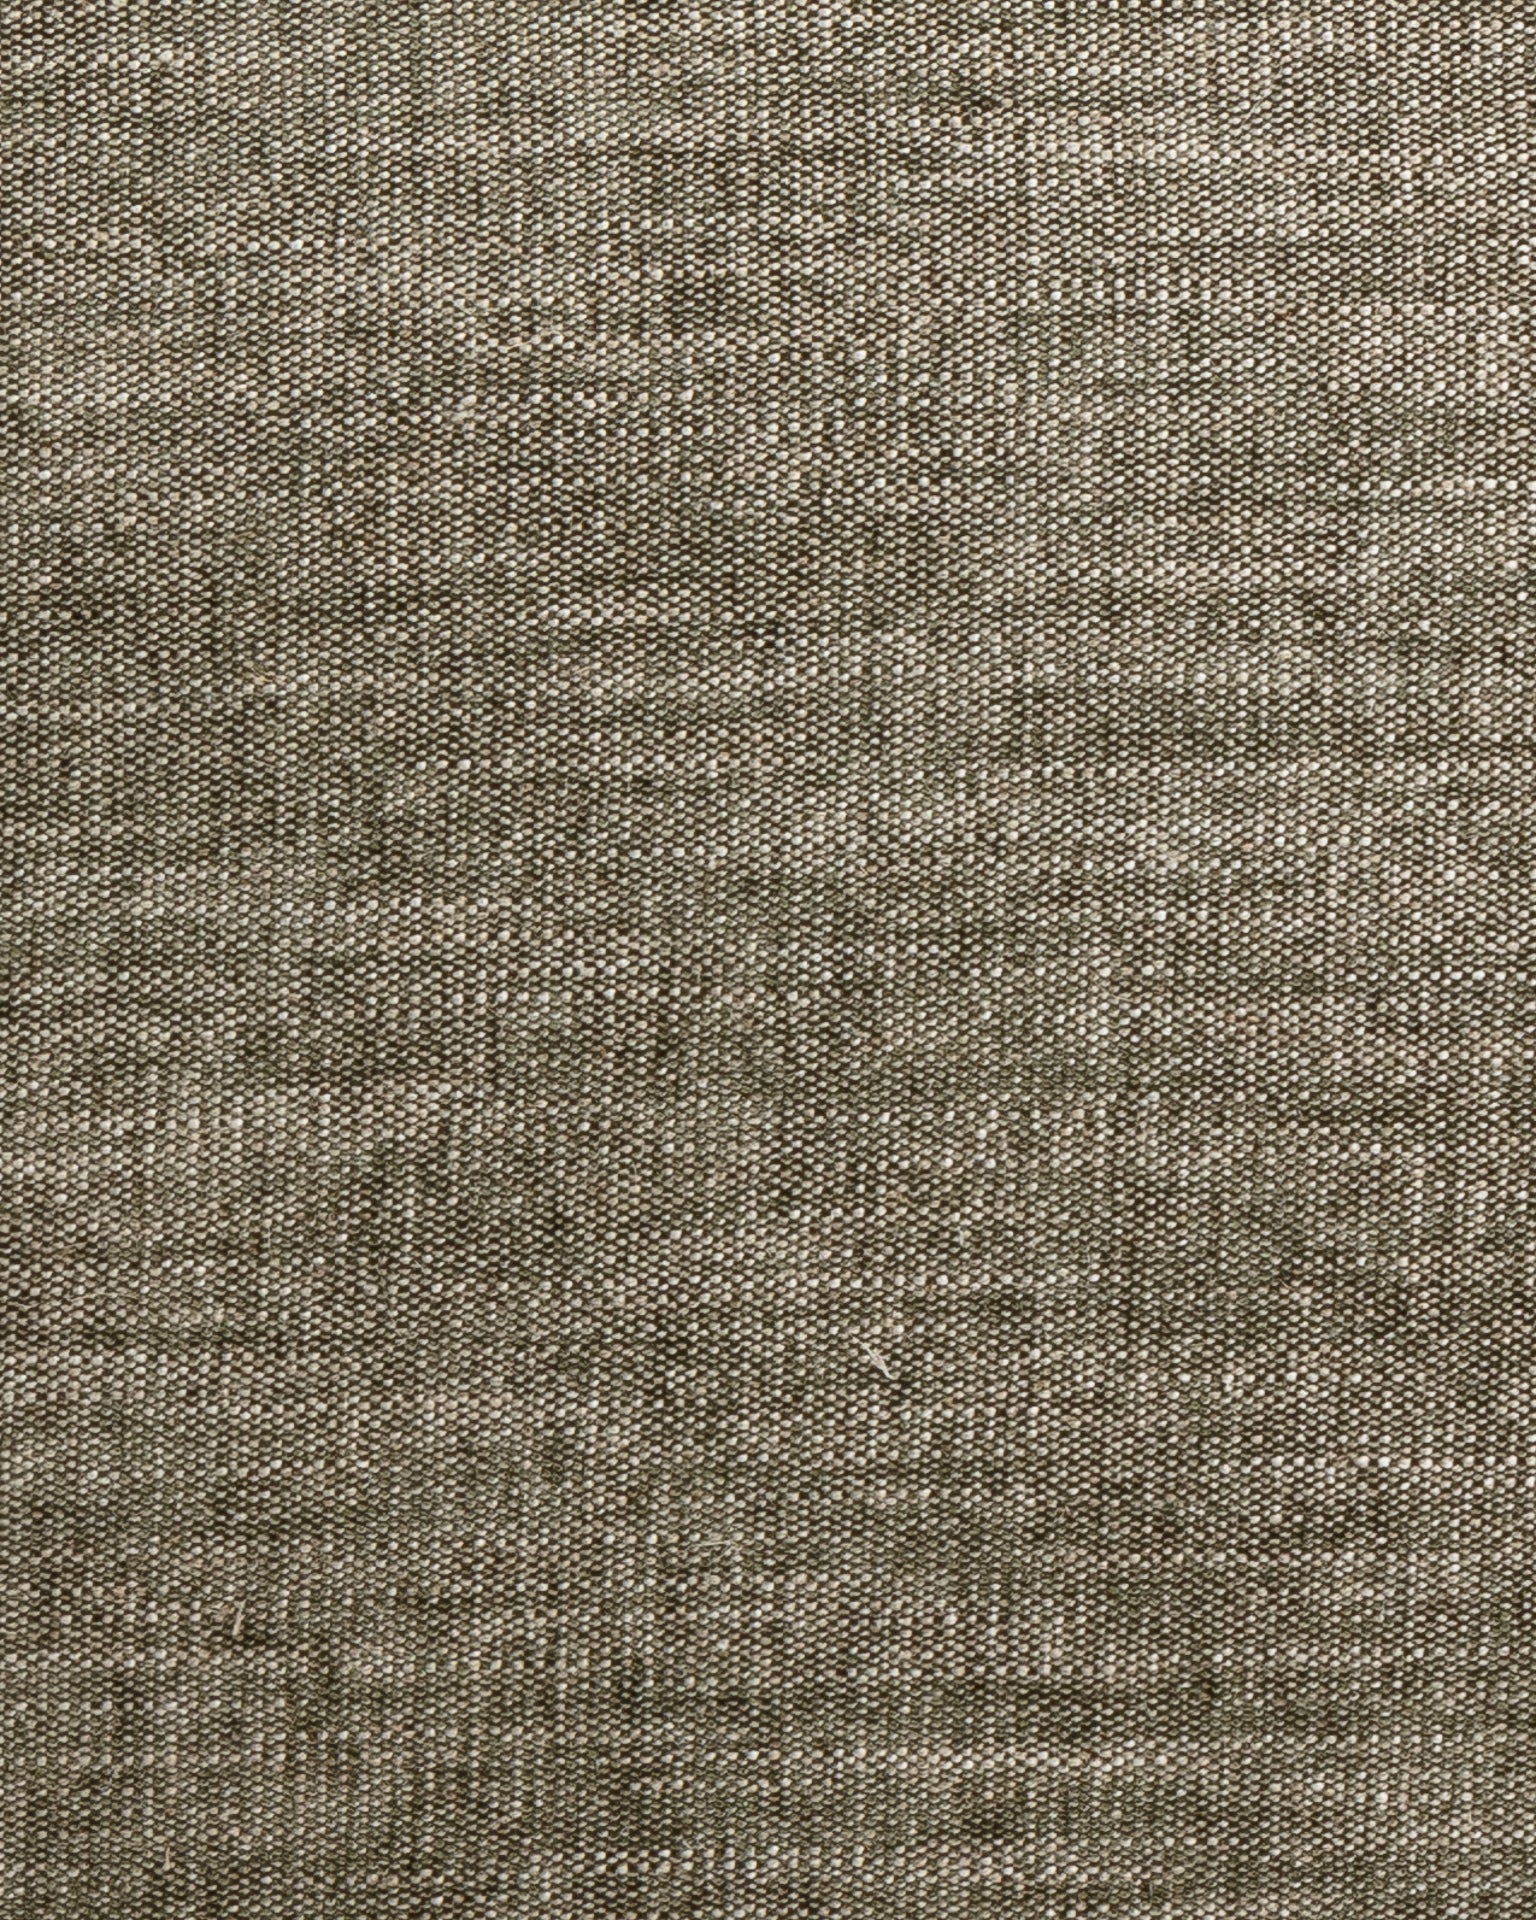 Close-up texture of a Beached Ivy 24x24" woven fabric with a detailed, subtle Arizona-style pattern in shades of beige and brown, showing fine threads and slight variations in color by Gabby.